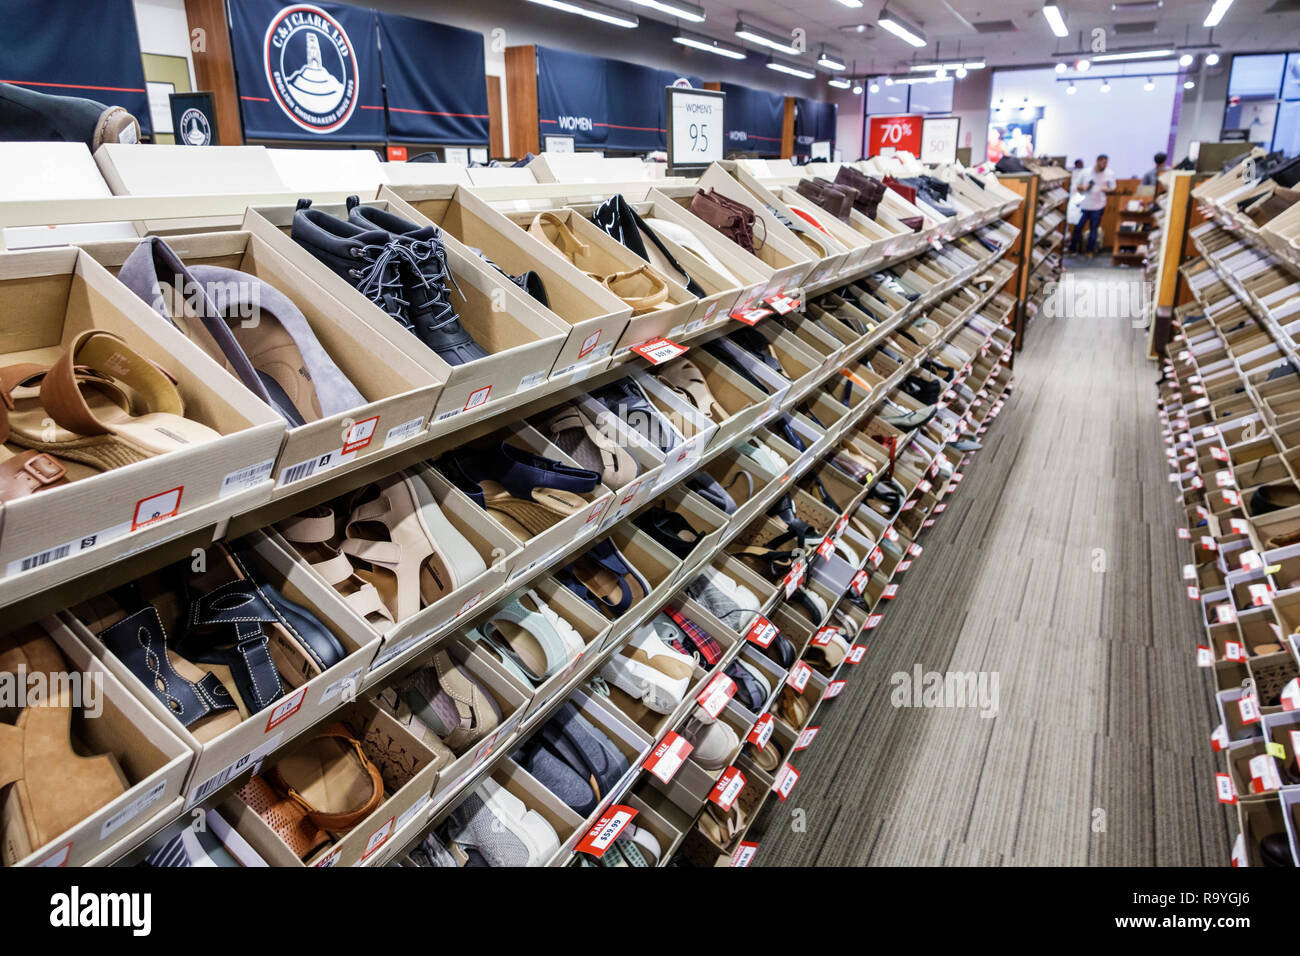 Clarks outlet stock photography images - Alamy